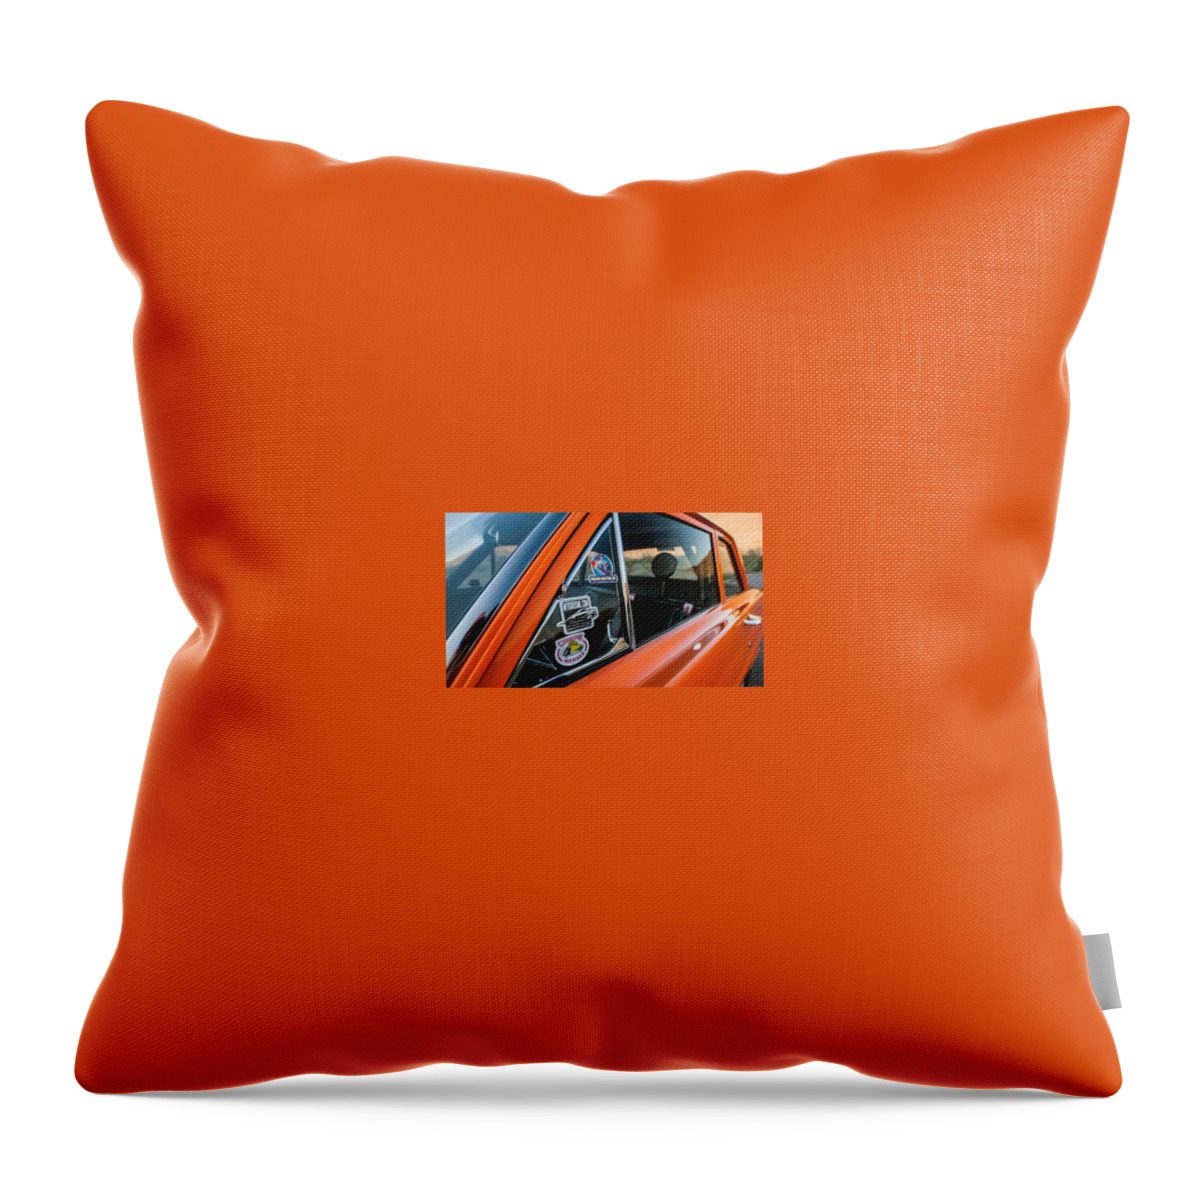 1964 Ford Falcon Throw Pillow featuring the photograph 1964 Ford Falcon by Jackie Russo